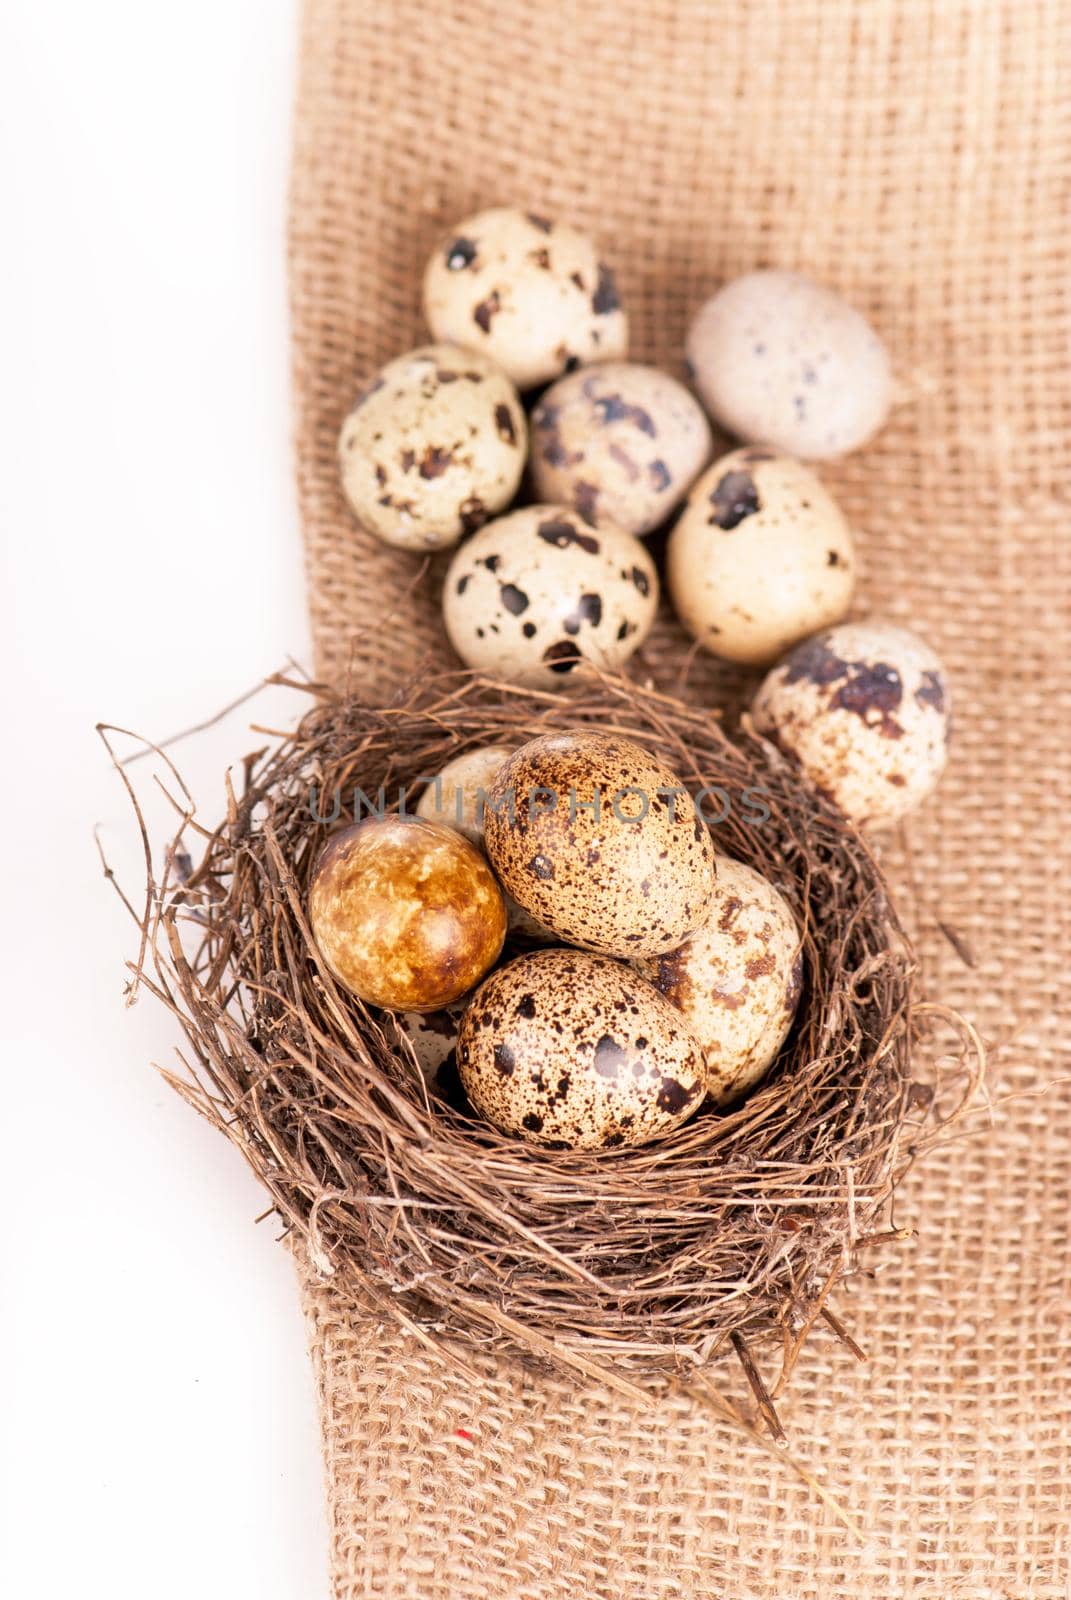 Nest with quail eggs on a canvas by aprilphoto